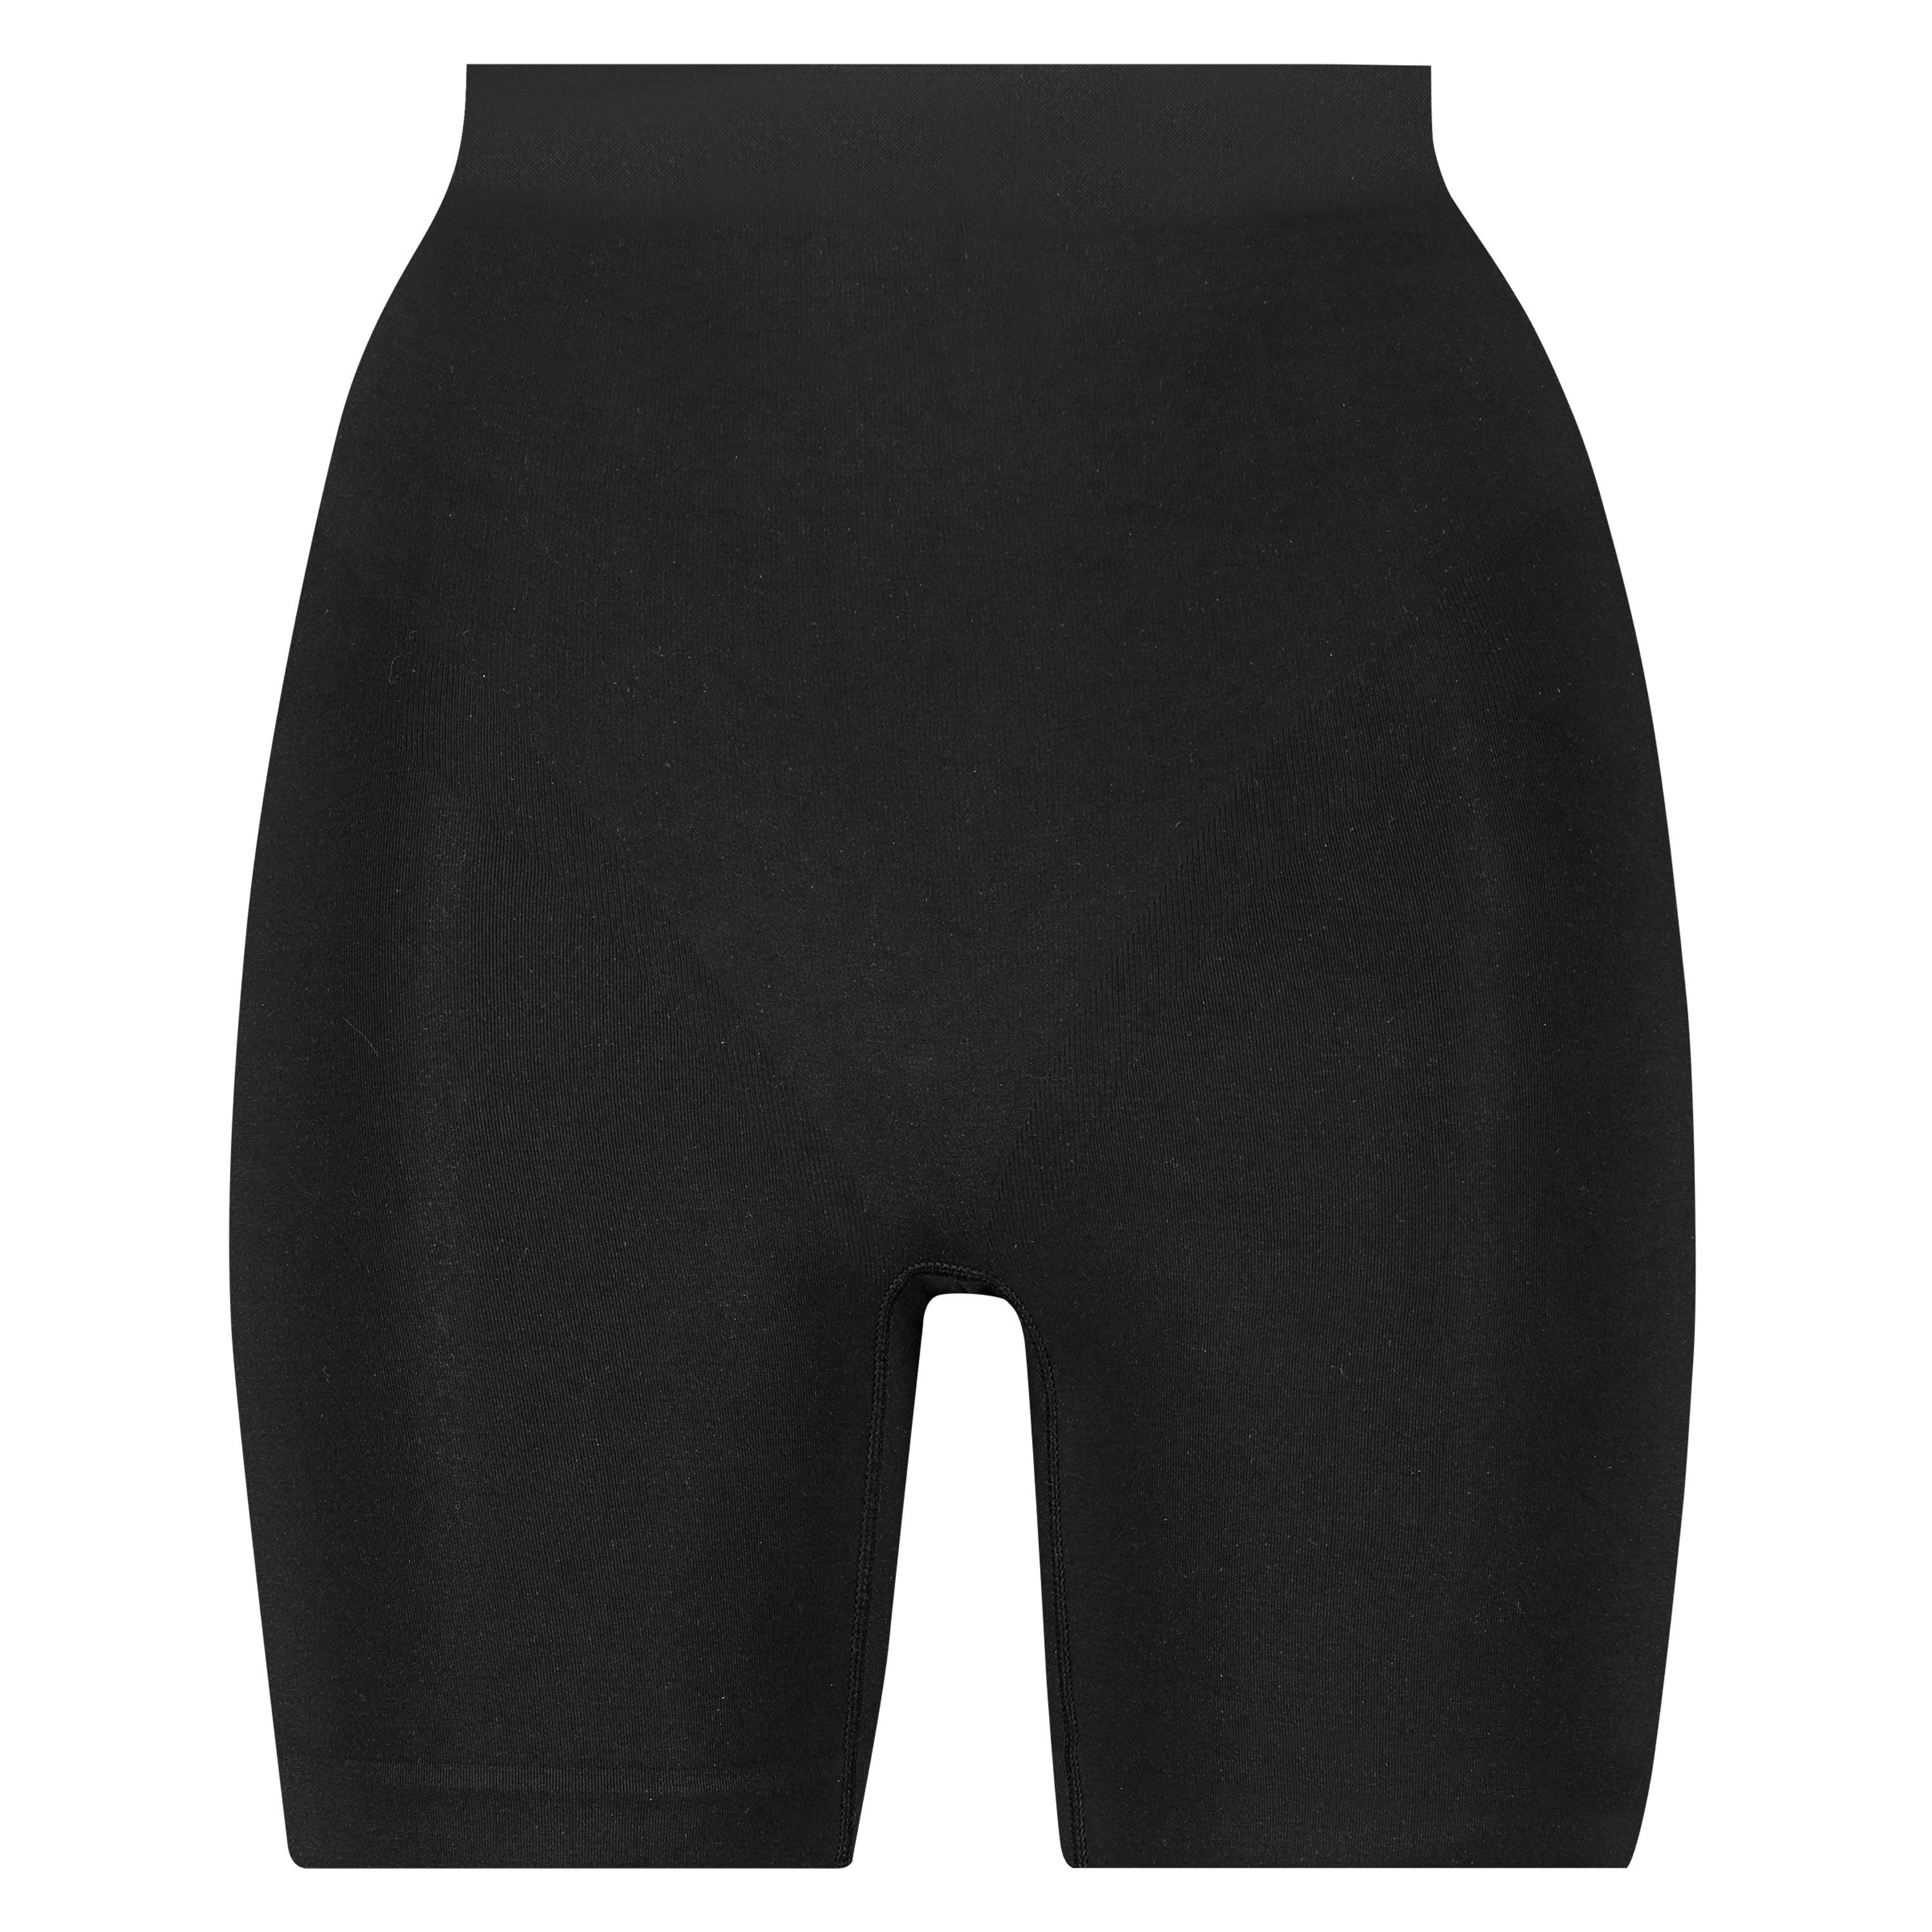 Firming high waisted thigh slimmer - Level 2, Black, main